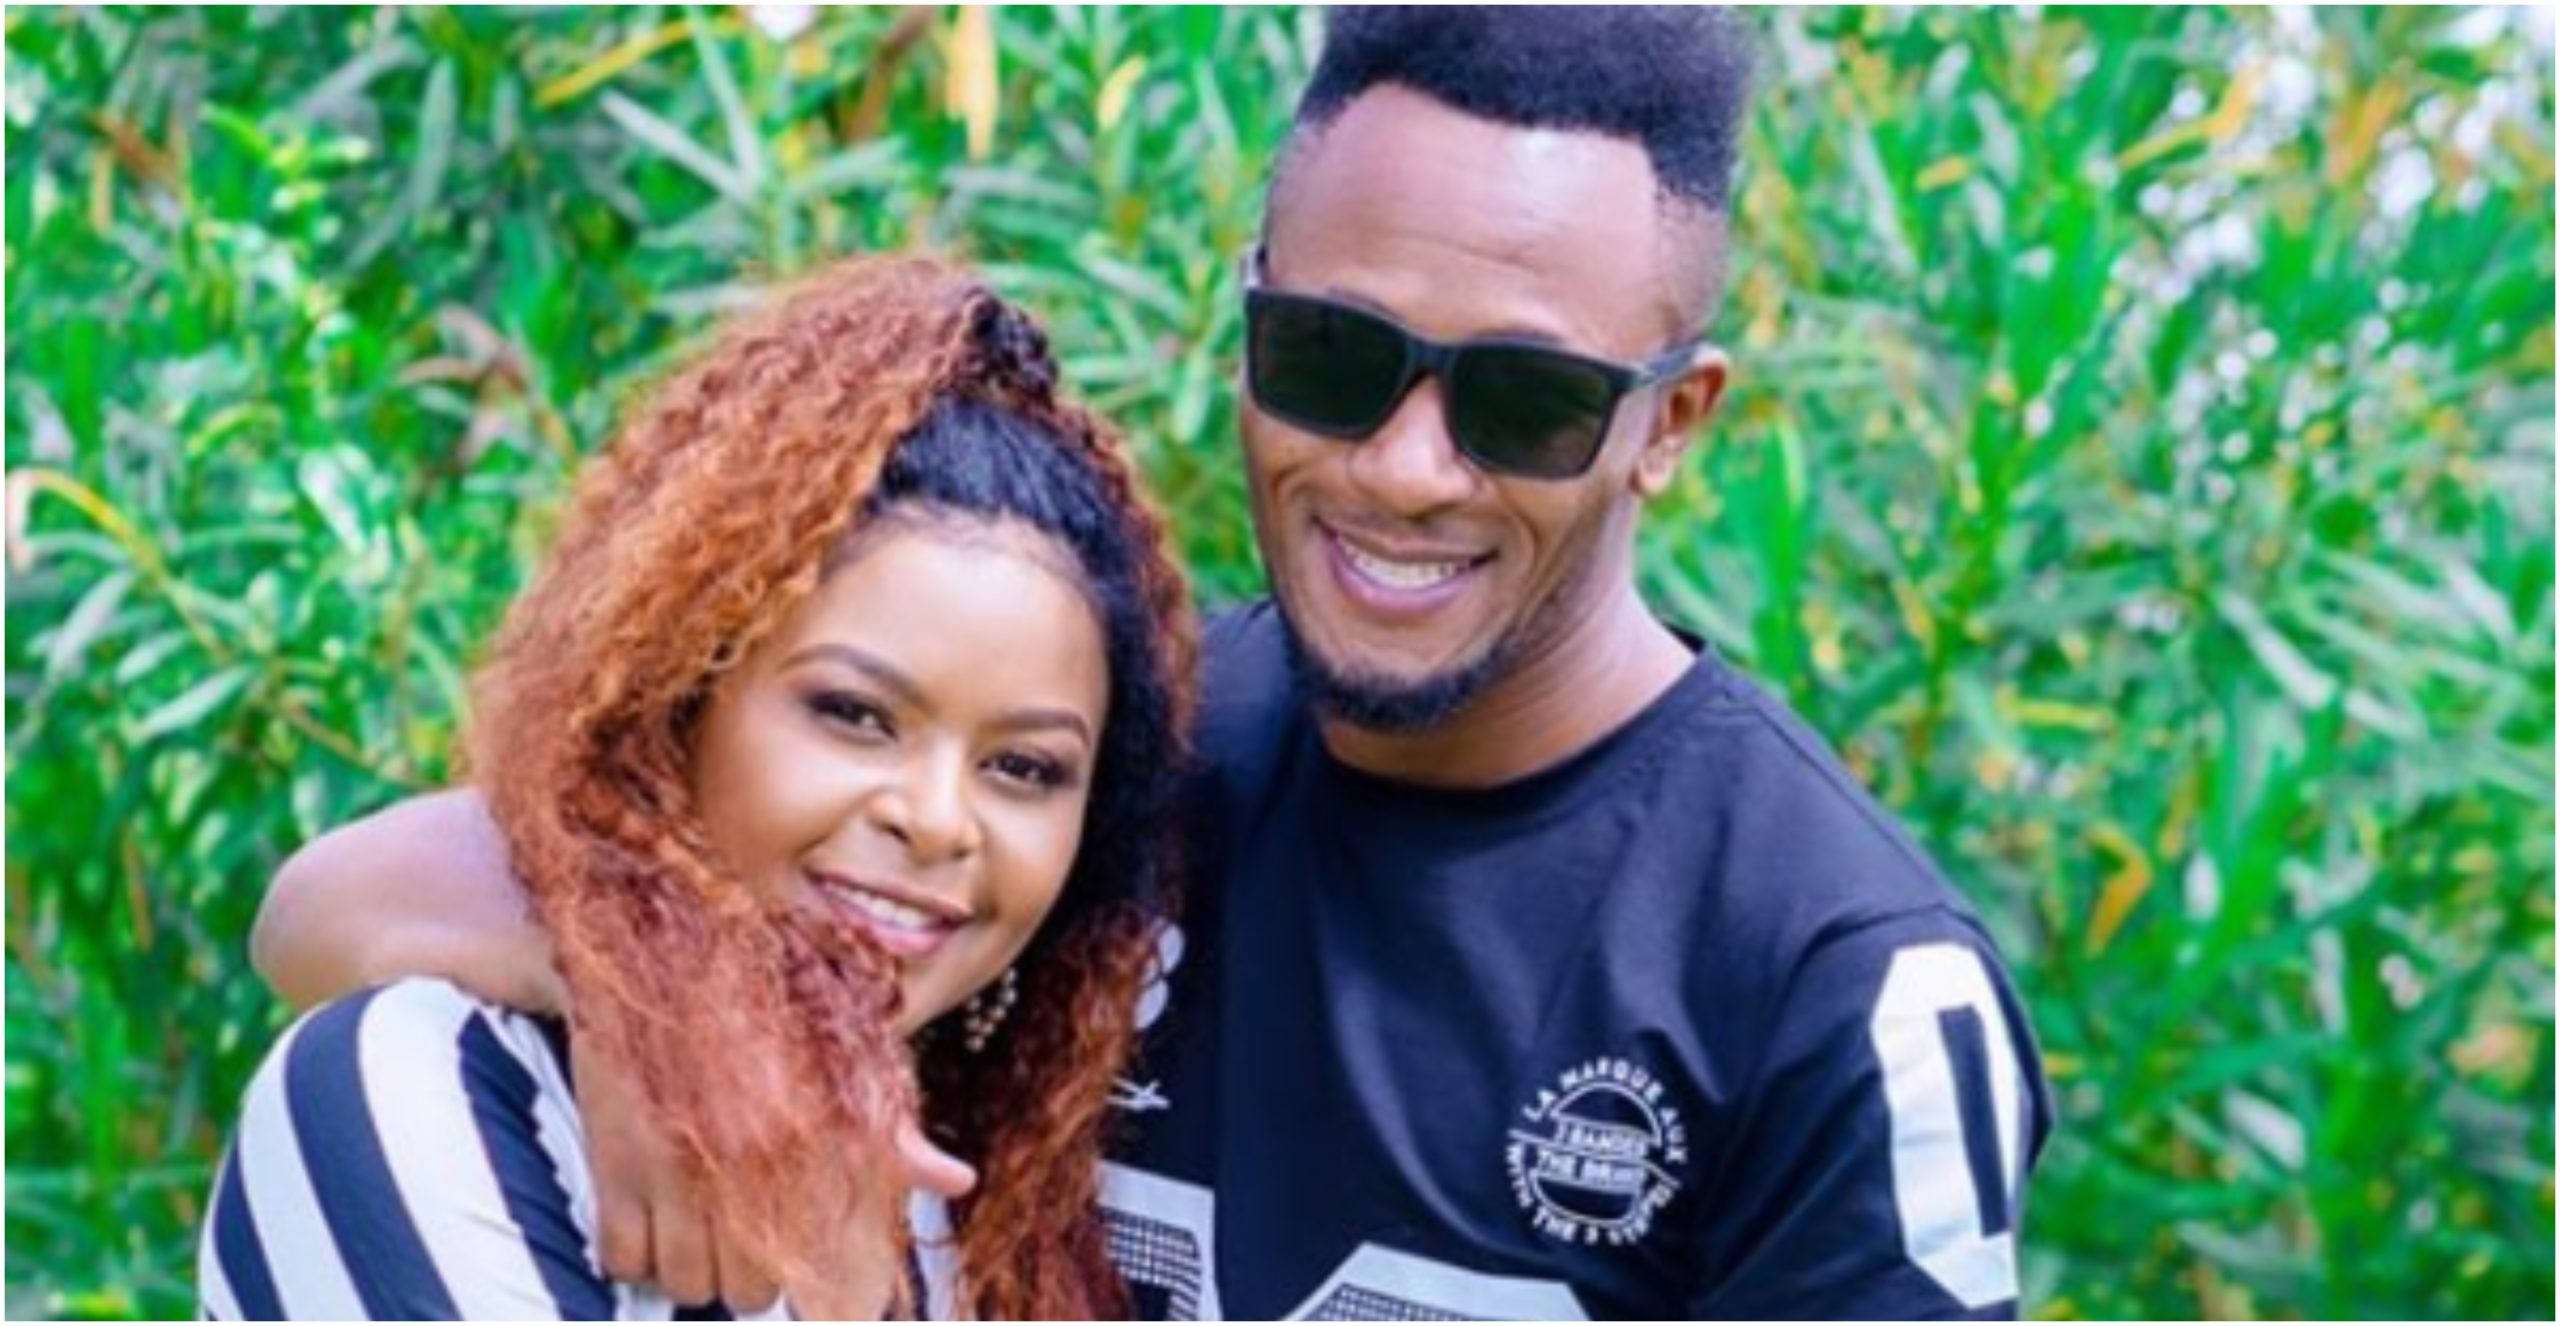 DJ Mo and Size 8 treated to a beautiful family vacation days after infidelity scandal (Videos)